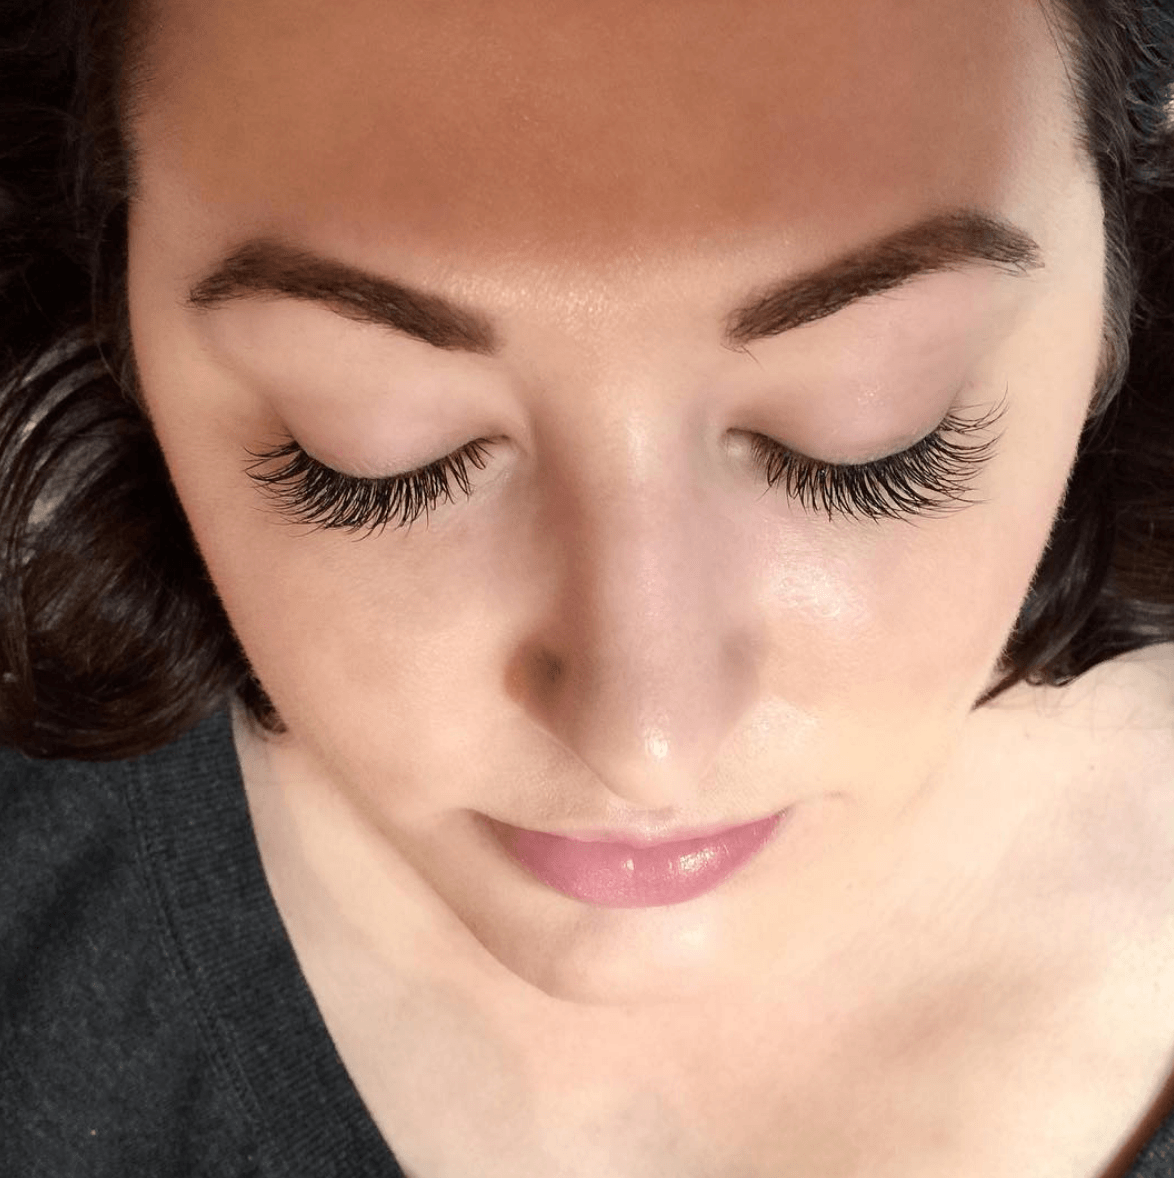 How to care for eyelash extensions - Caring for Eyelash Extensions by popular LA cruelty free beauty blogger My Beauty Bunny